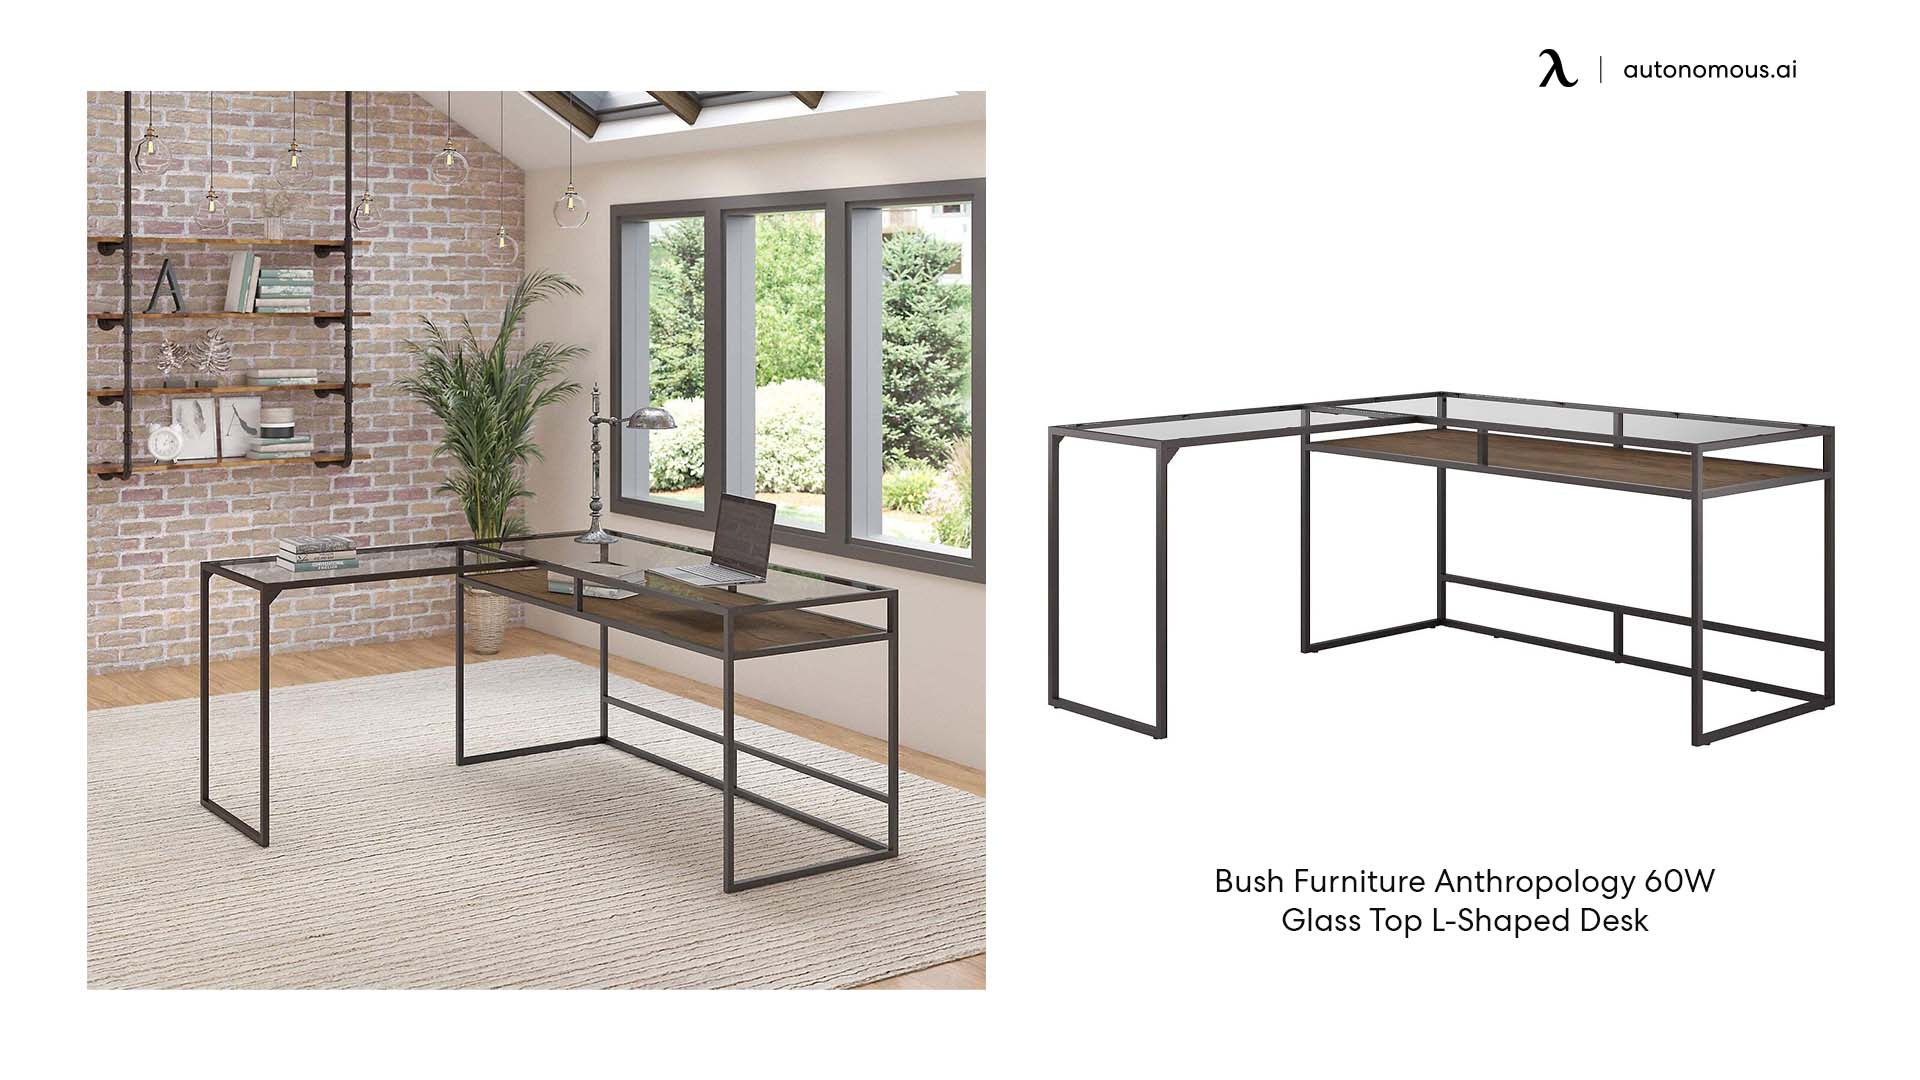 60W Glass Top Anthropology L Desk from Bush Furniture